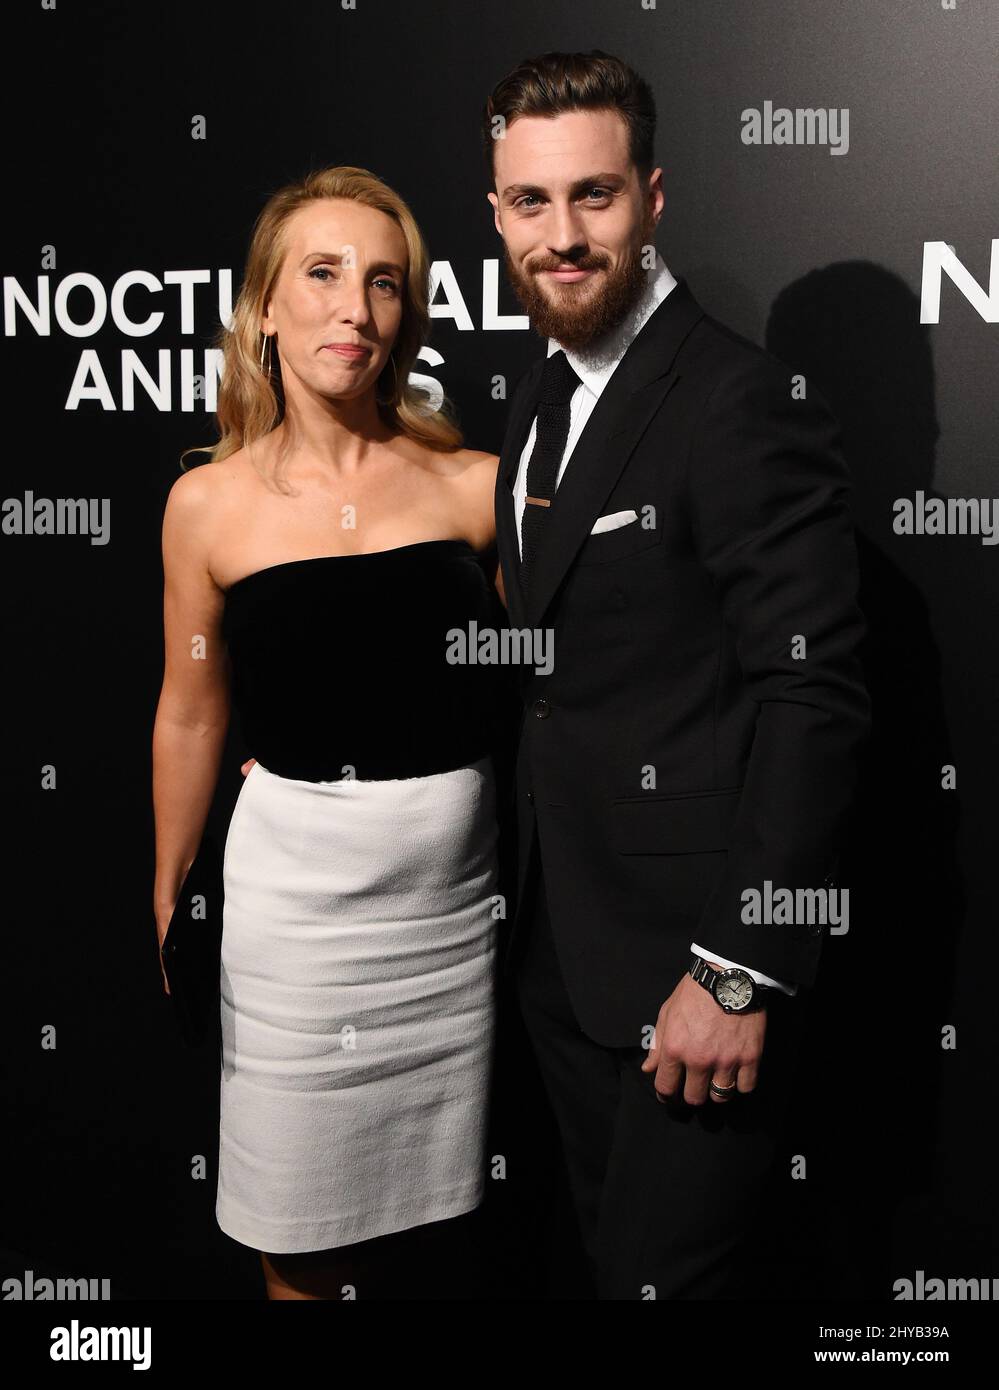 Aaron Taylor-Johnson and Sam Taylor-Johnson arriving to the 'Nocturnal Animals' Los Angeles Screening held at the Hammer Museum Stock Photo